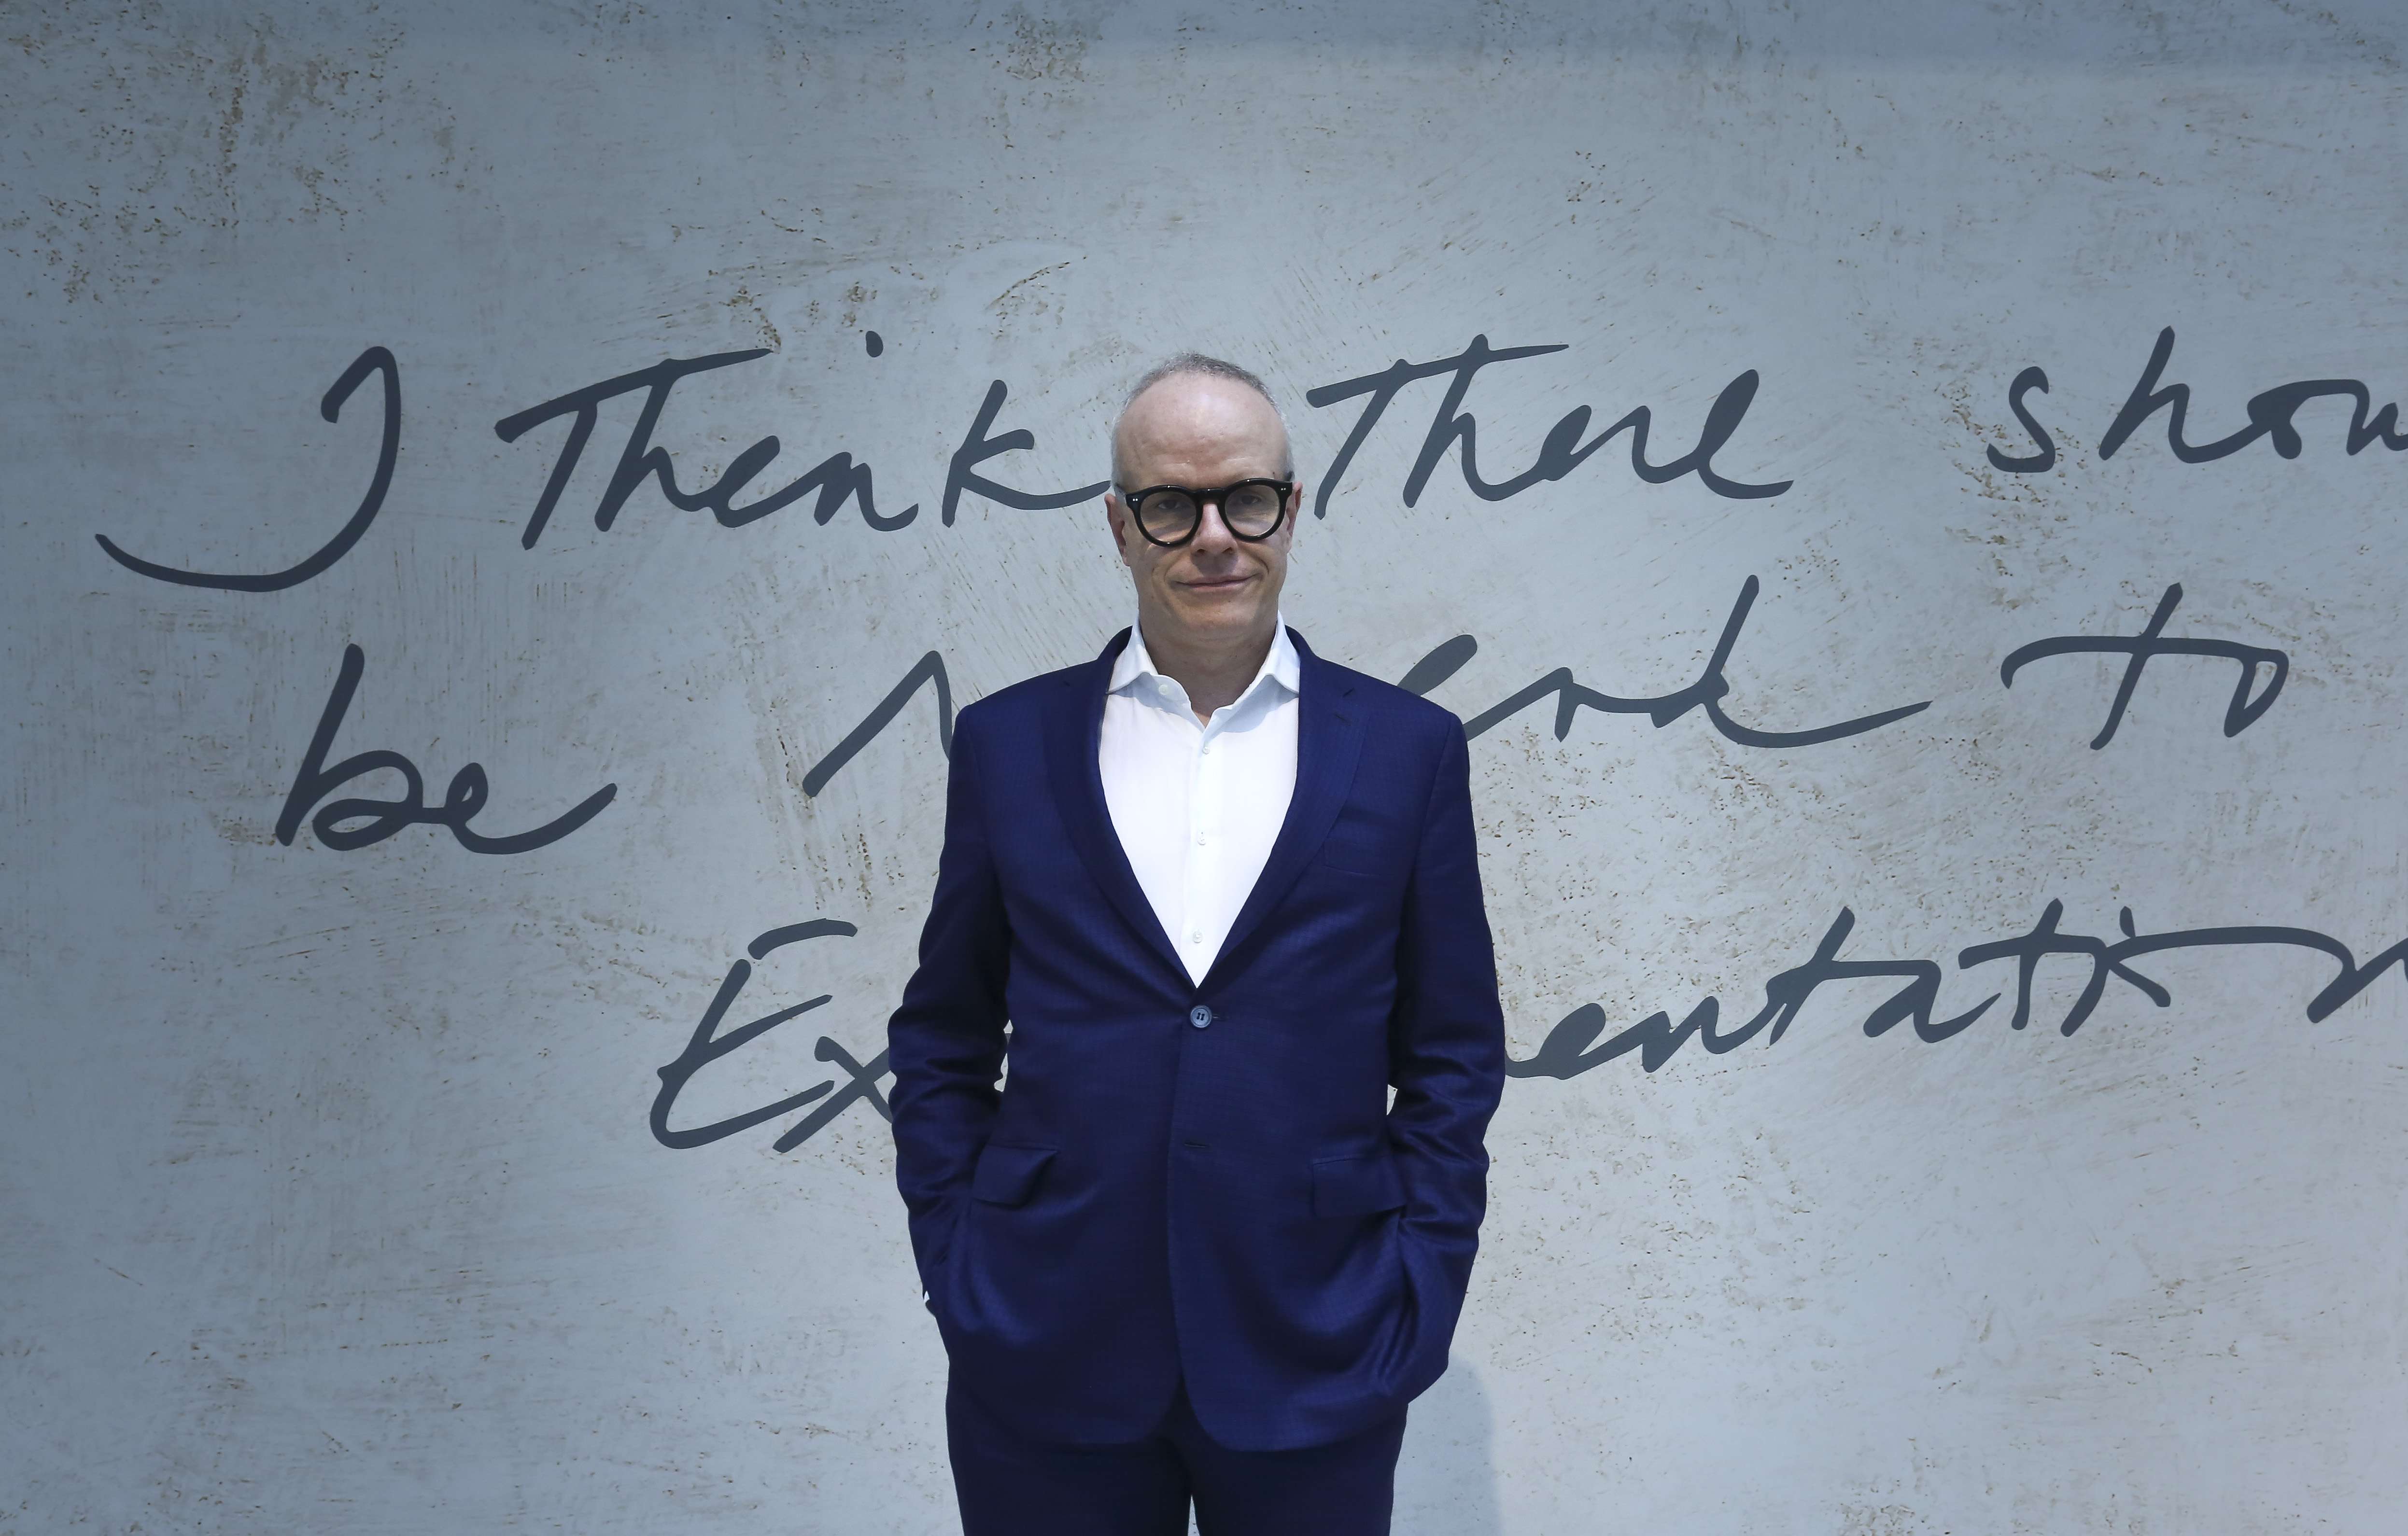 The fast-talking Hans Ulrich Obrist, recently in Hong Kong for the opening of a Zaha Hadid exhibition, recalls how he got into art and the impact of the architect’s death last year